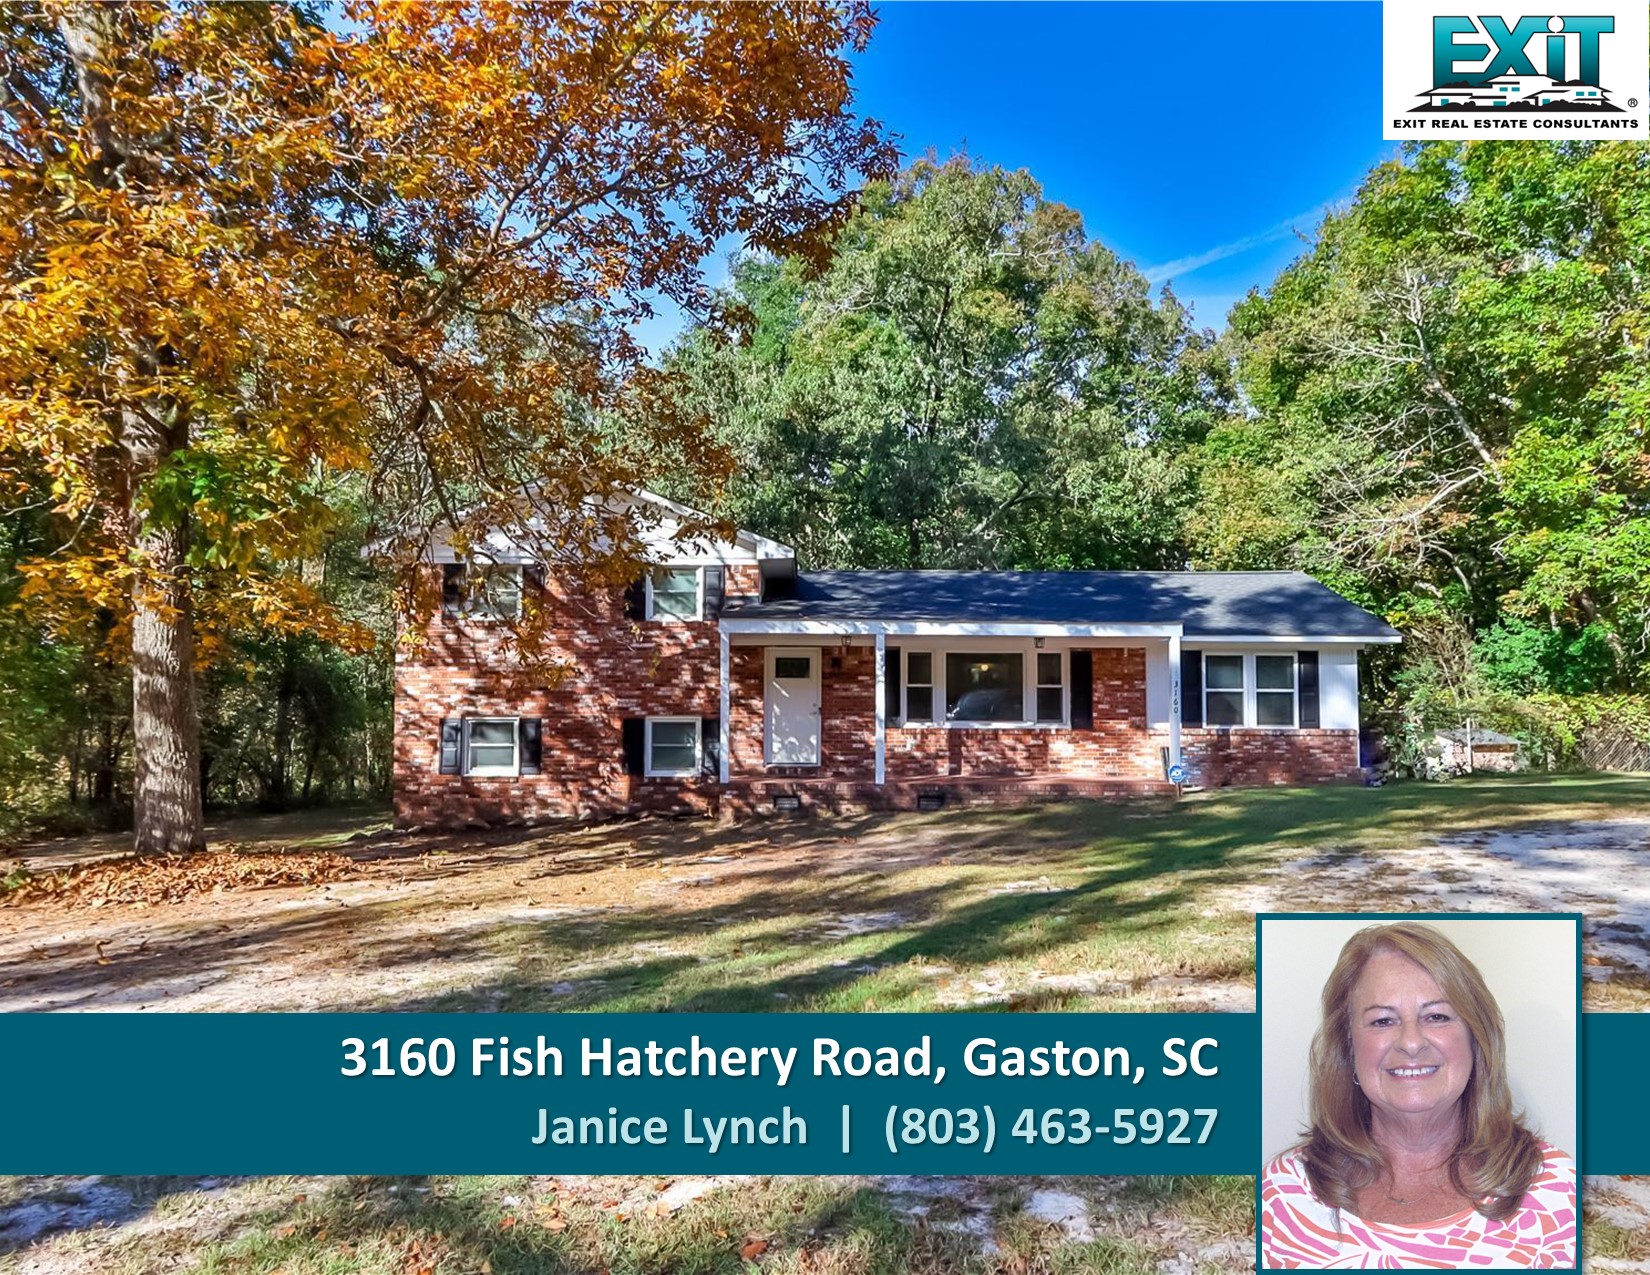 Just listed in Gaston